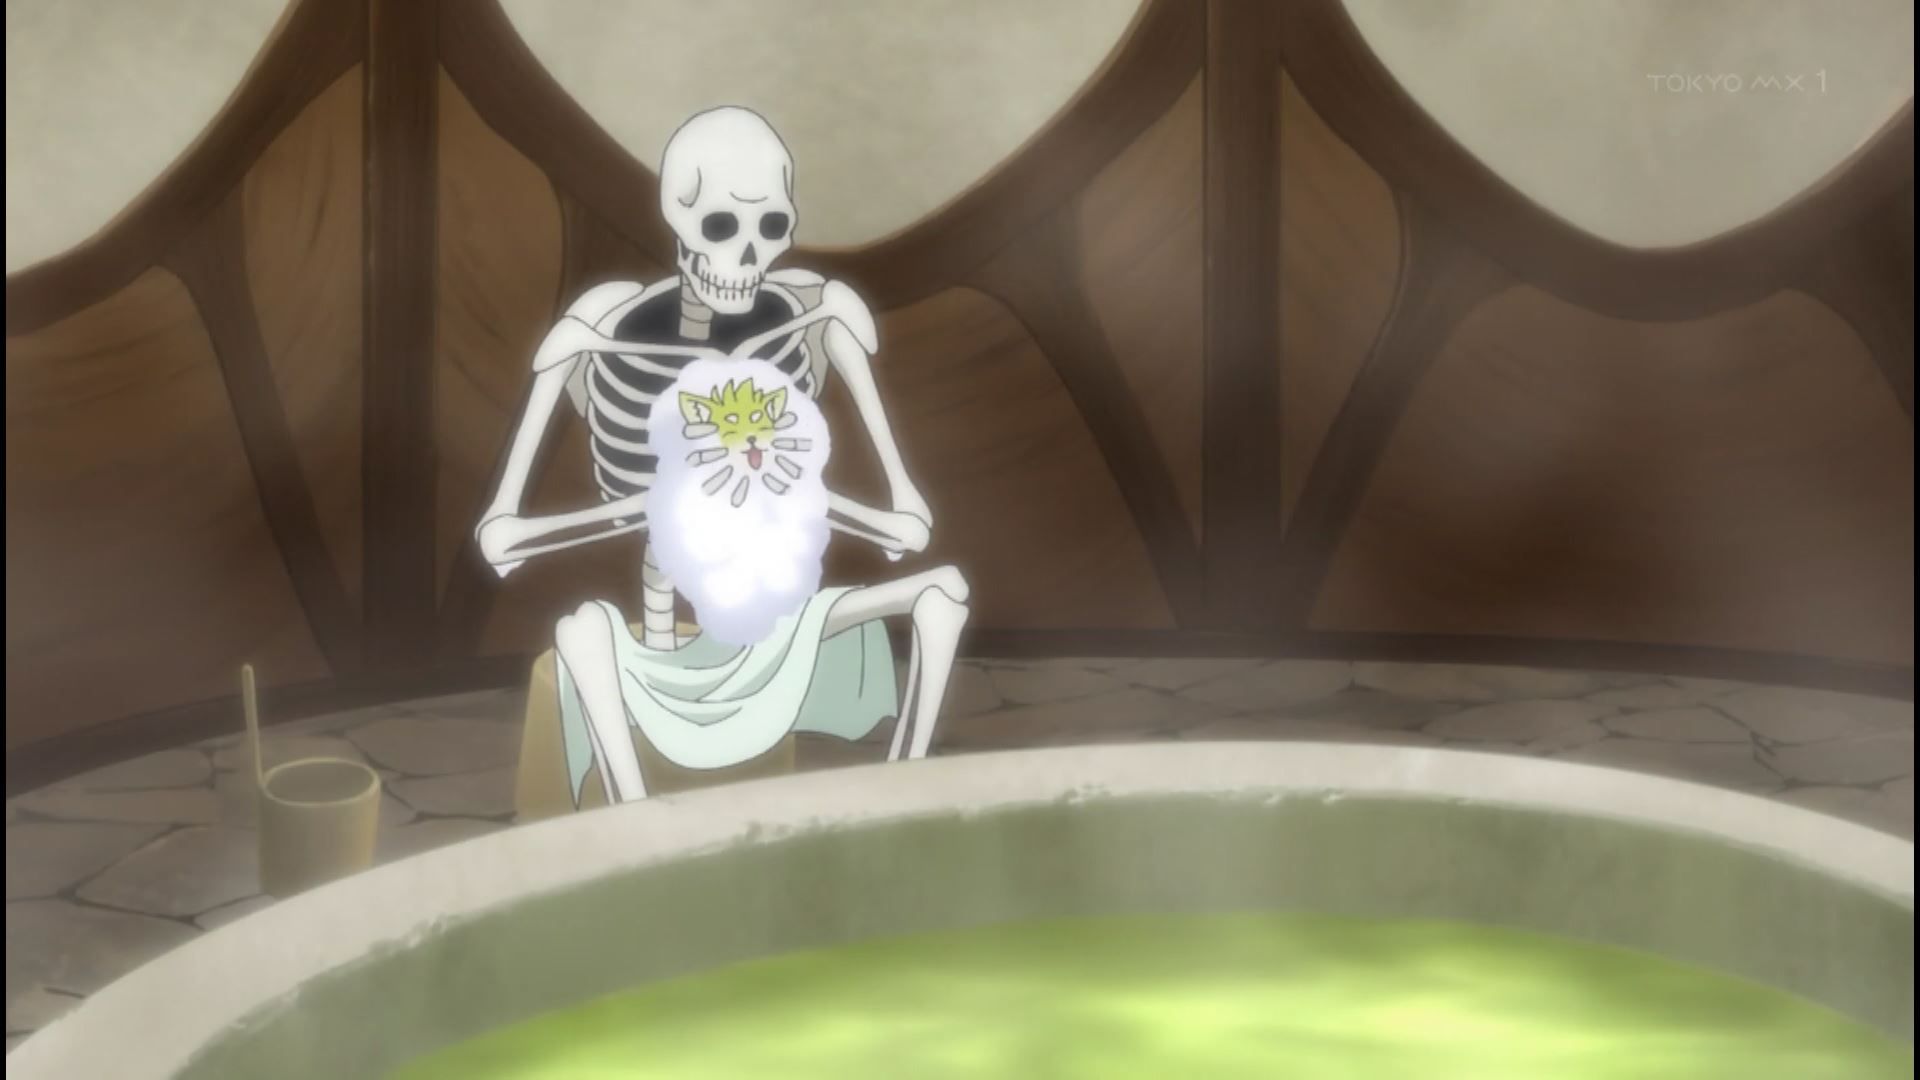 In episode 6 of the anime "Skeleton Knight, I'm Going Out to Another World" a girl takes off her clothes and looks completely naked and erotic 7